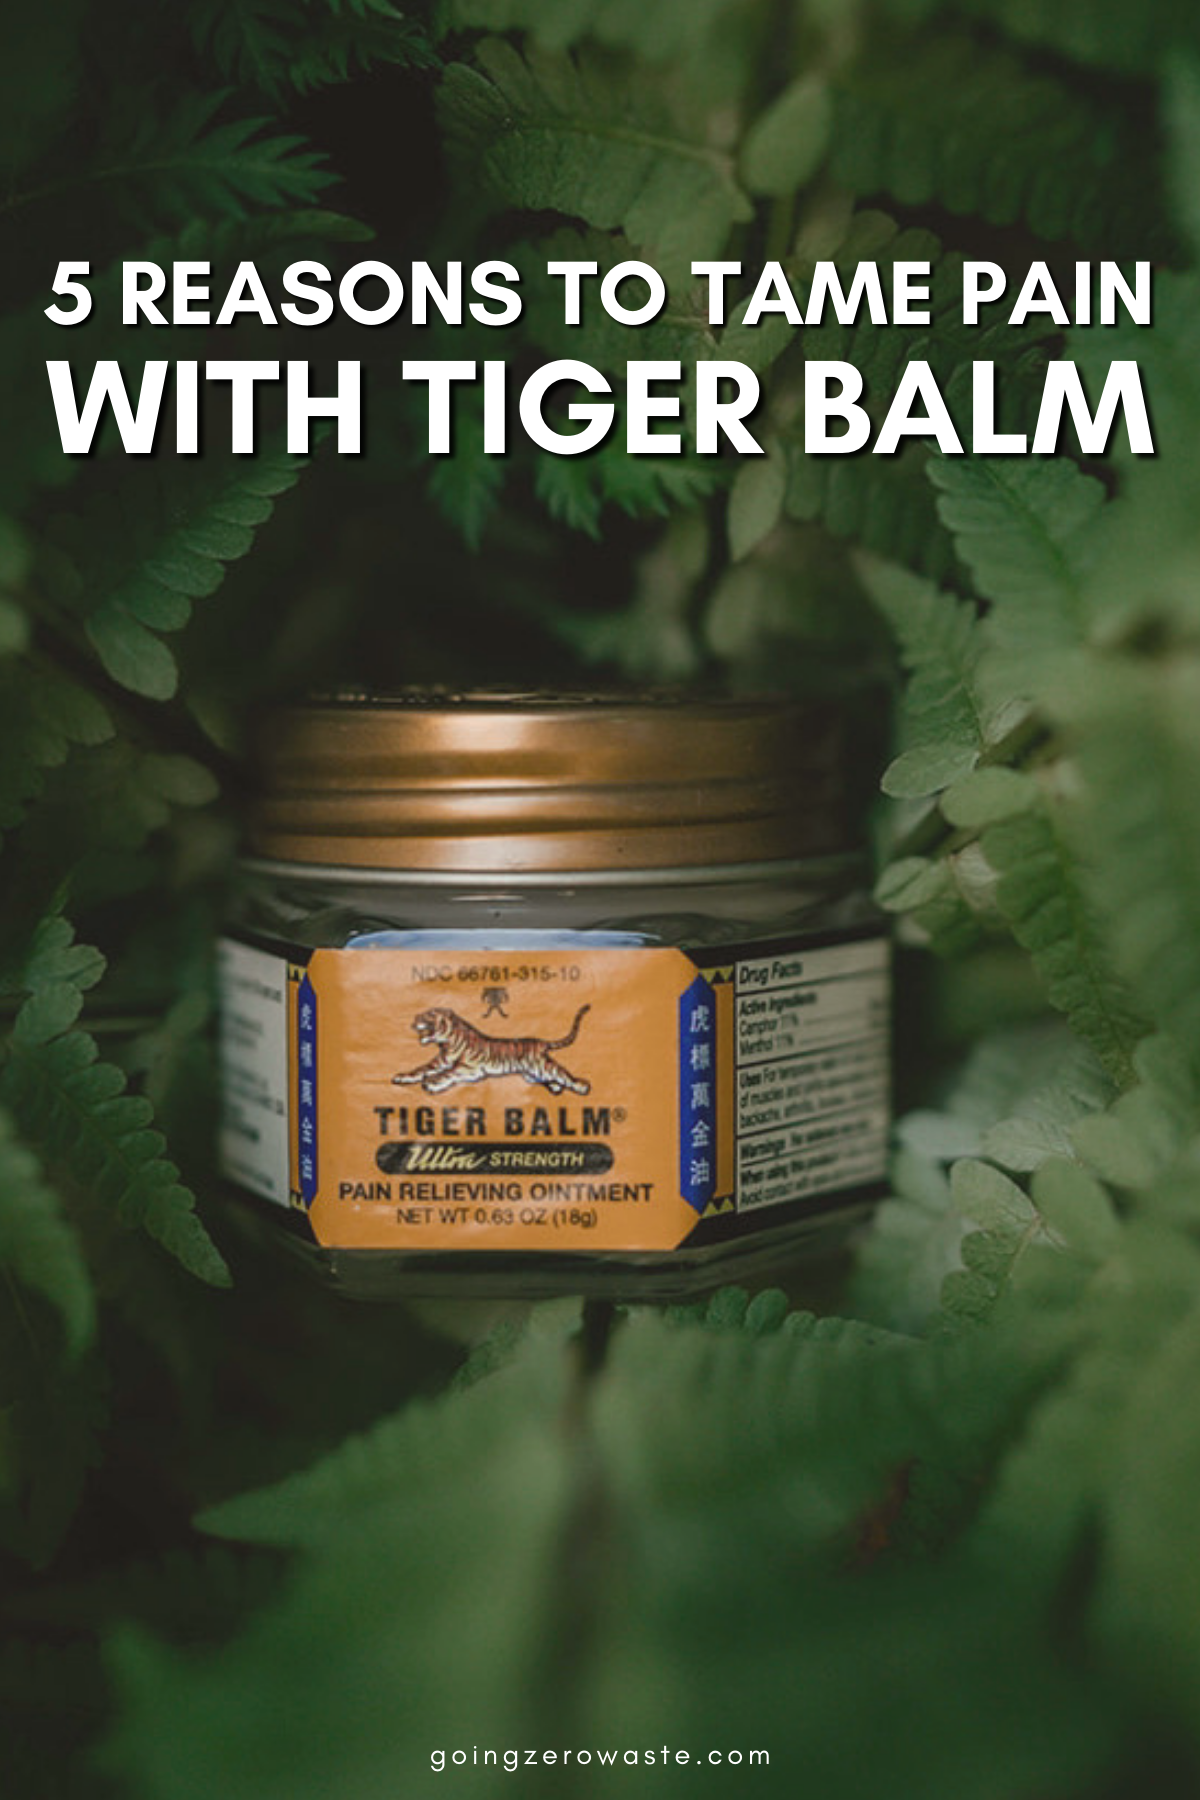 5 Ways to Tame Pain With Tiger Balm